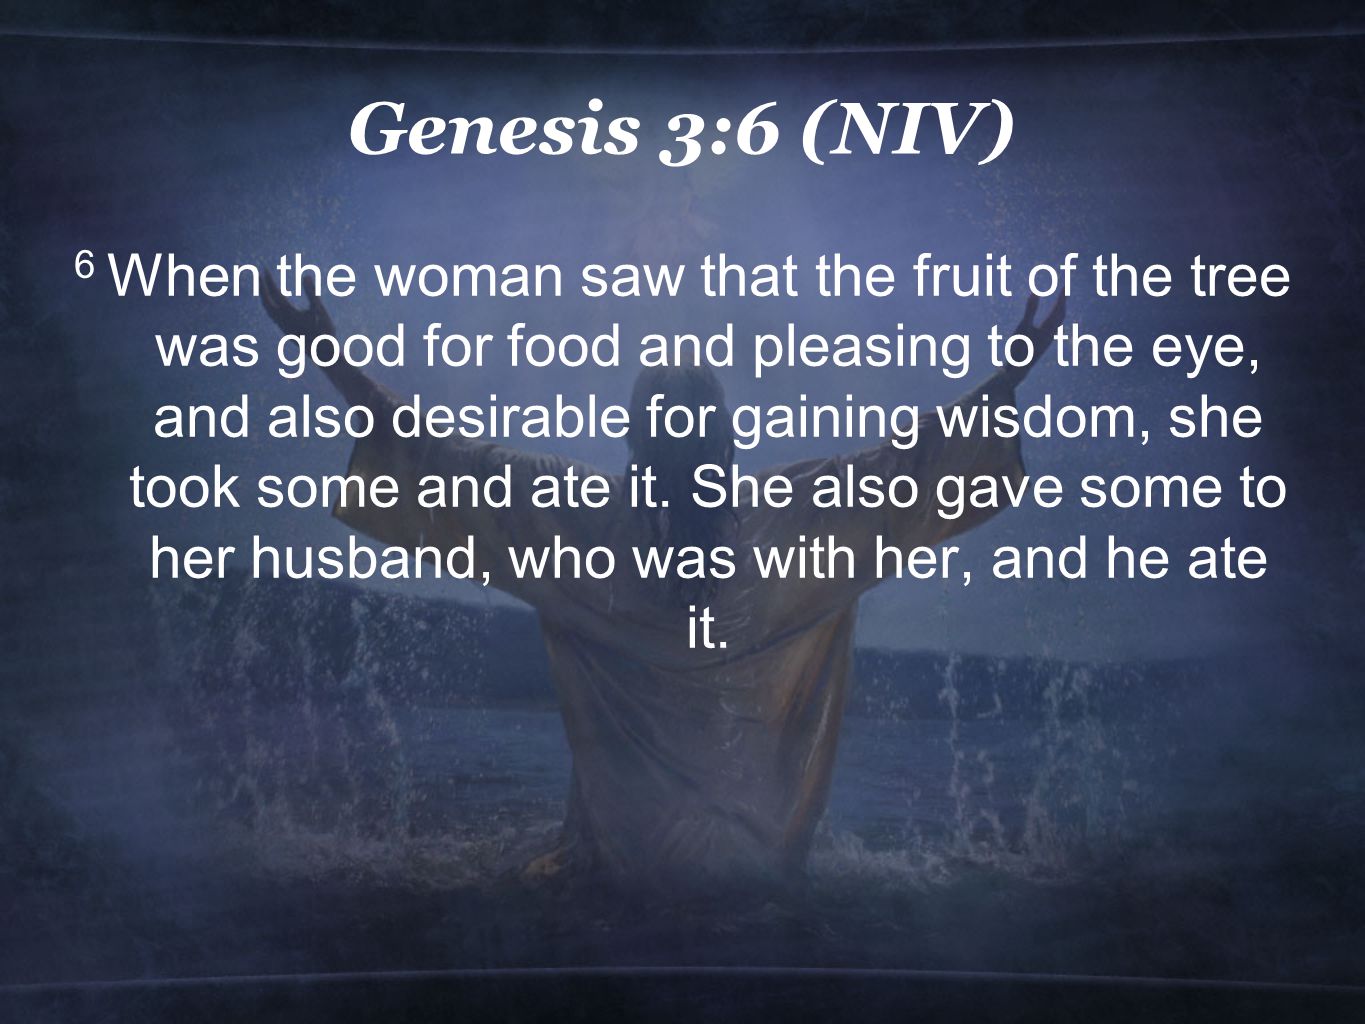 Genesis 3:6 (NIV) 6 When the woman saw that the fruit of the tree was good for food and pleasing to the eye, and also desirable for gaining wisdom, she took some and ate it.